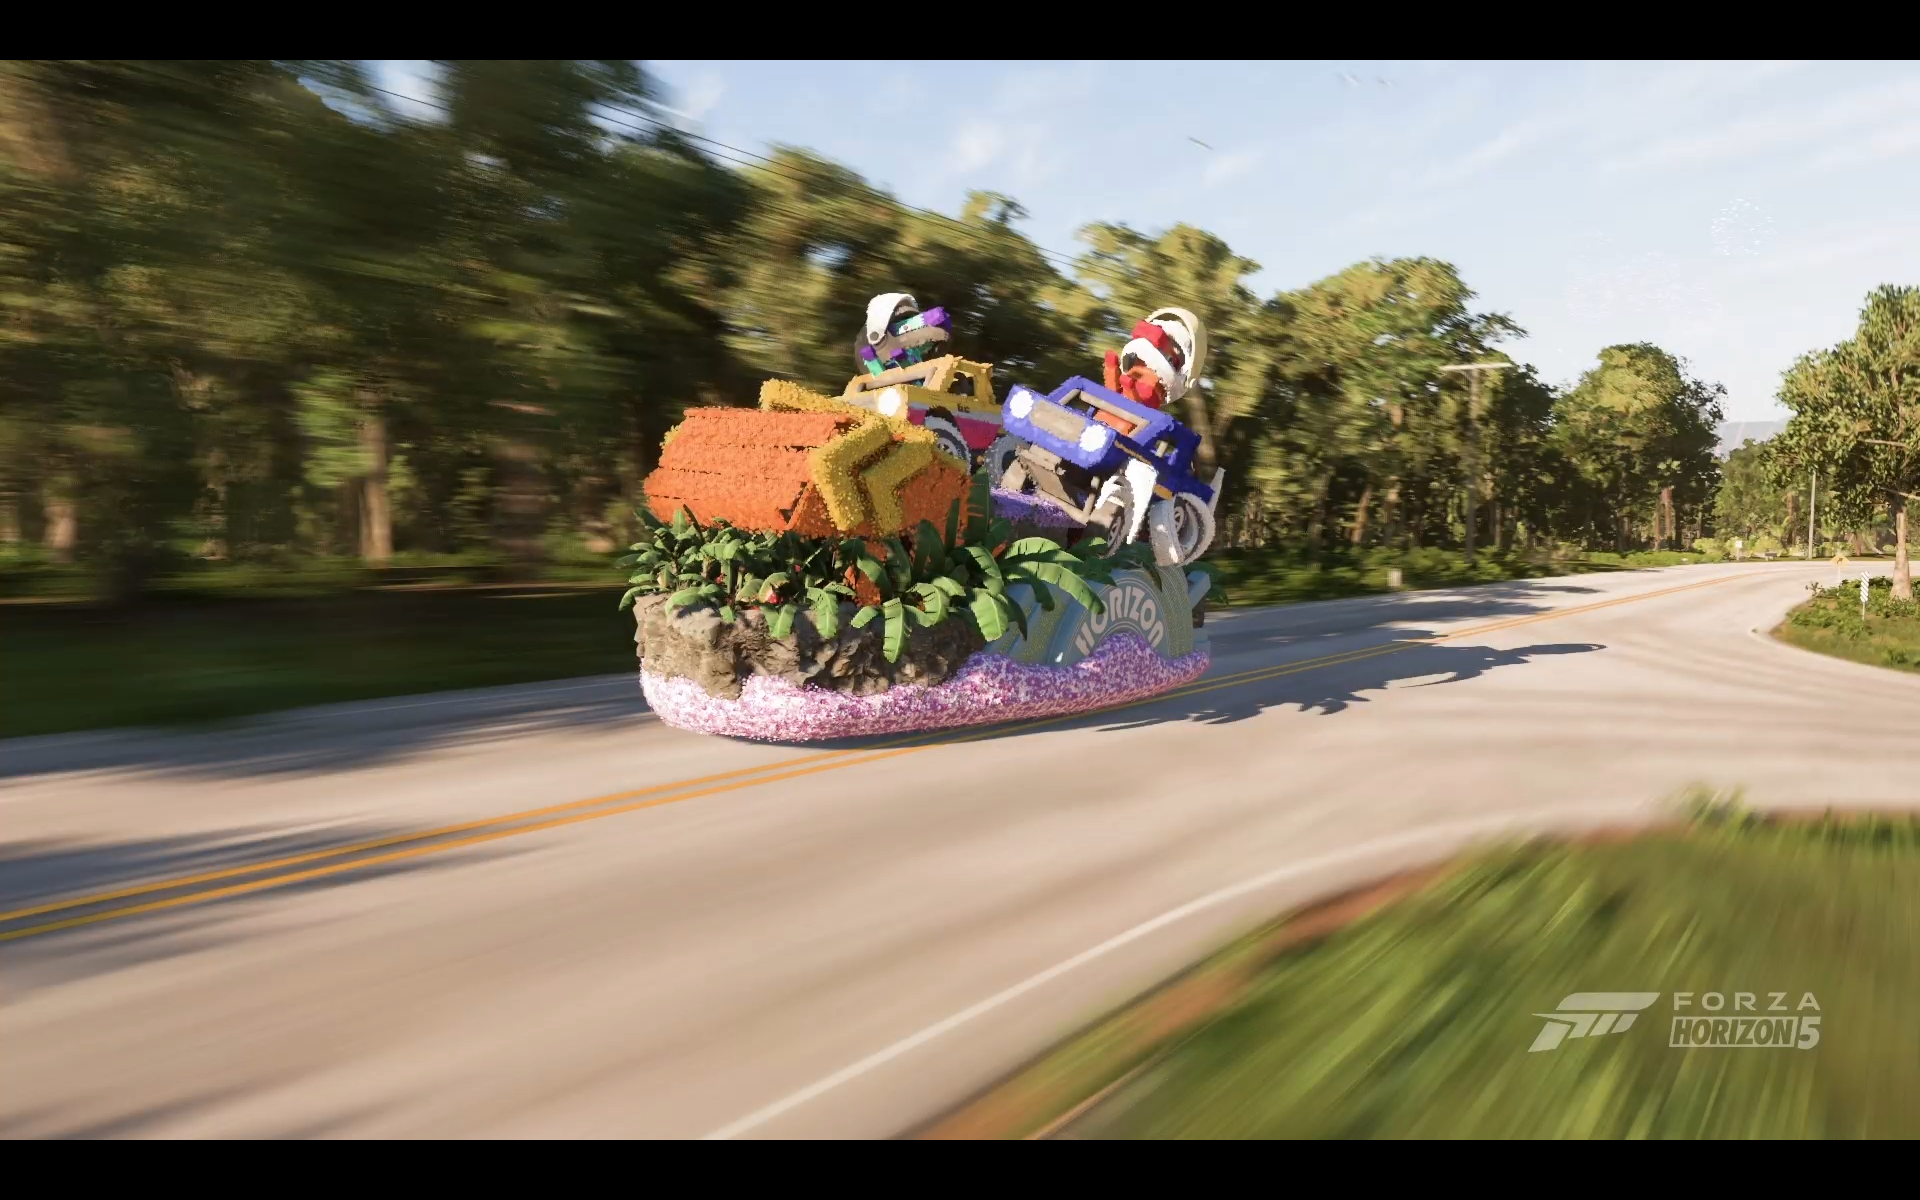 An in-game photo showing a very large, colorful parade float speeding along a road. 